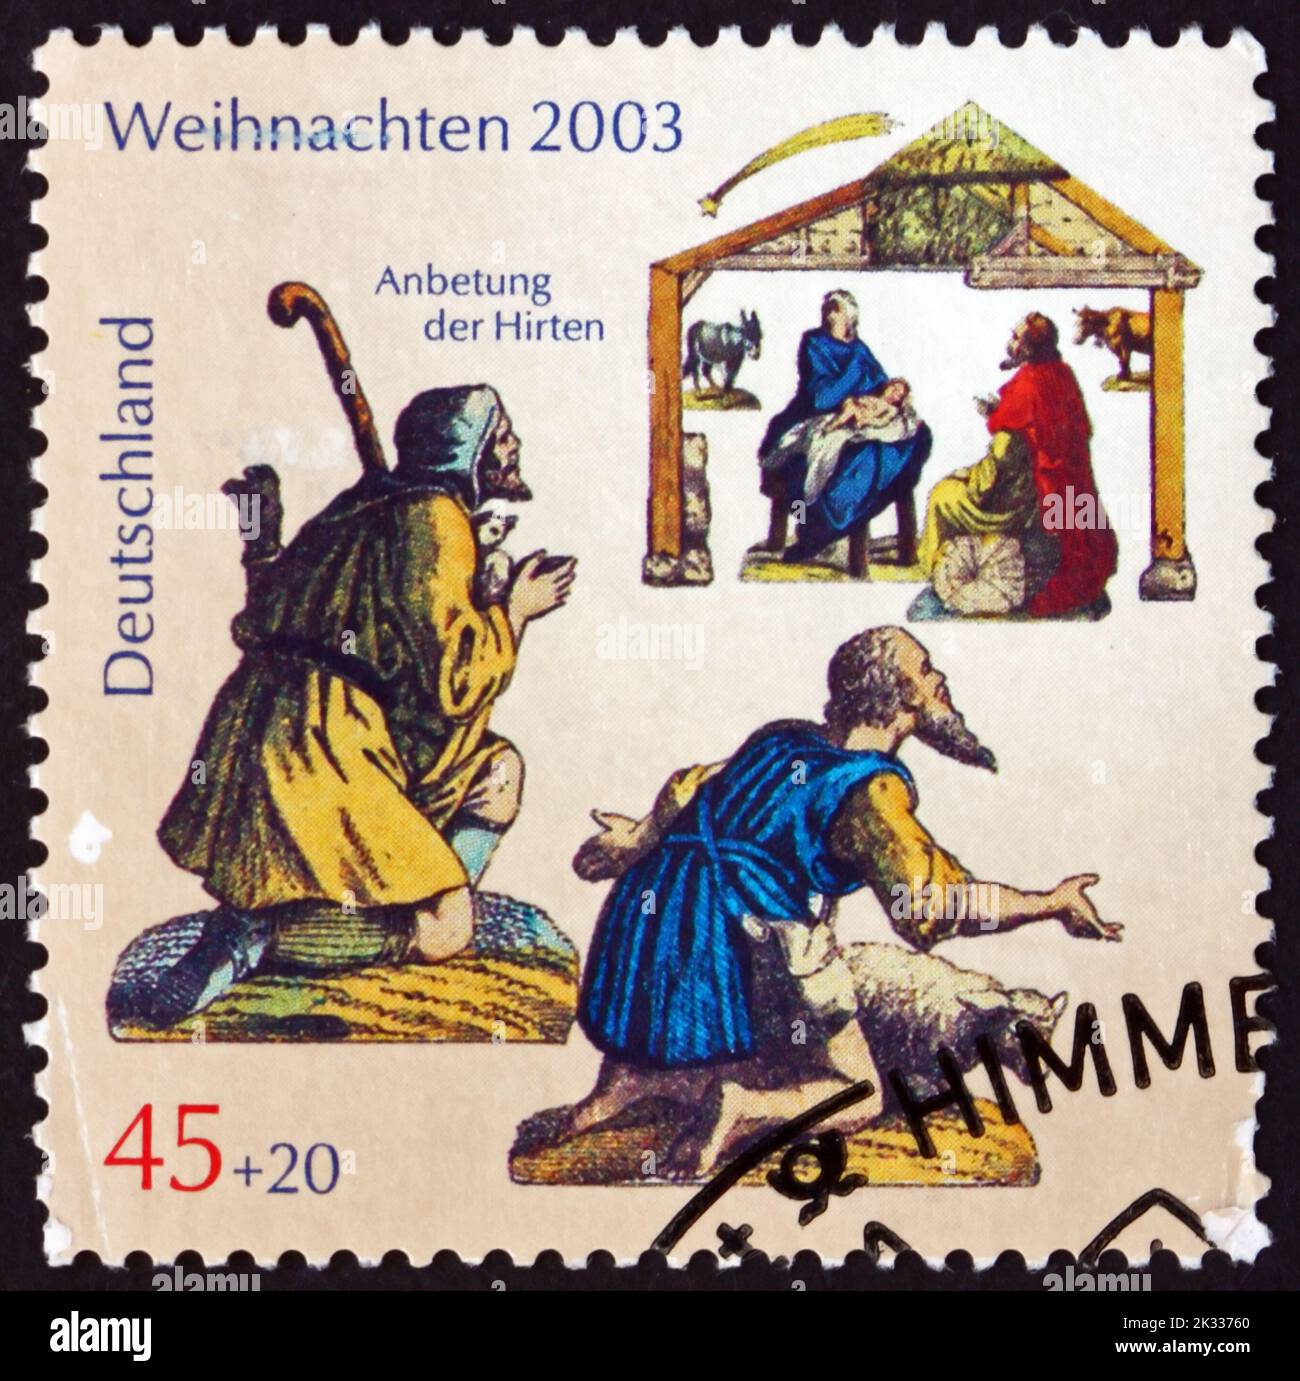 GERMANY - CIRCA 2003: a stamp printed in Germany shows Adoration of the Shepherds and Holy Family, Christmas, circa 2003 Stock Photo